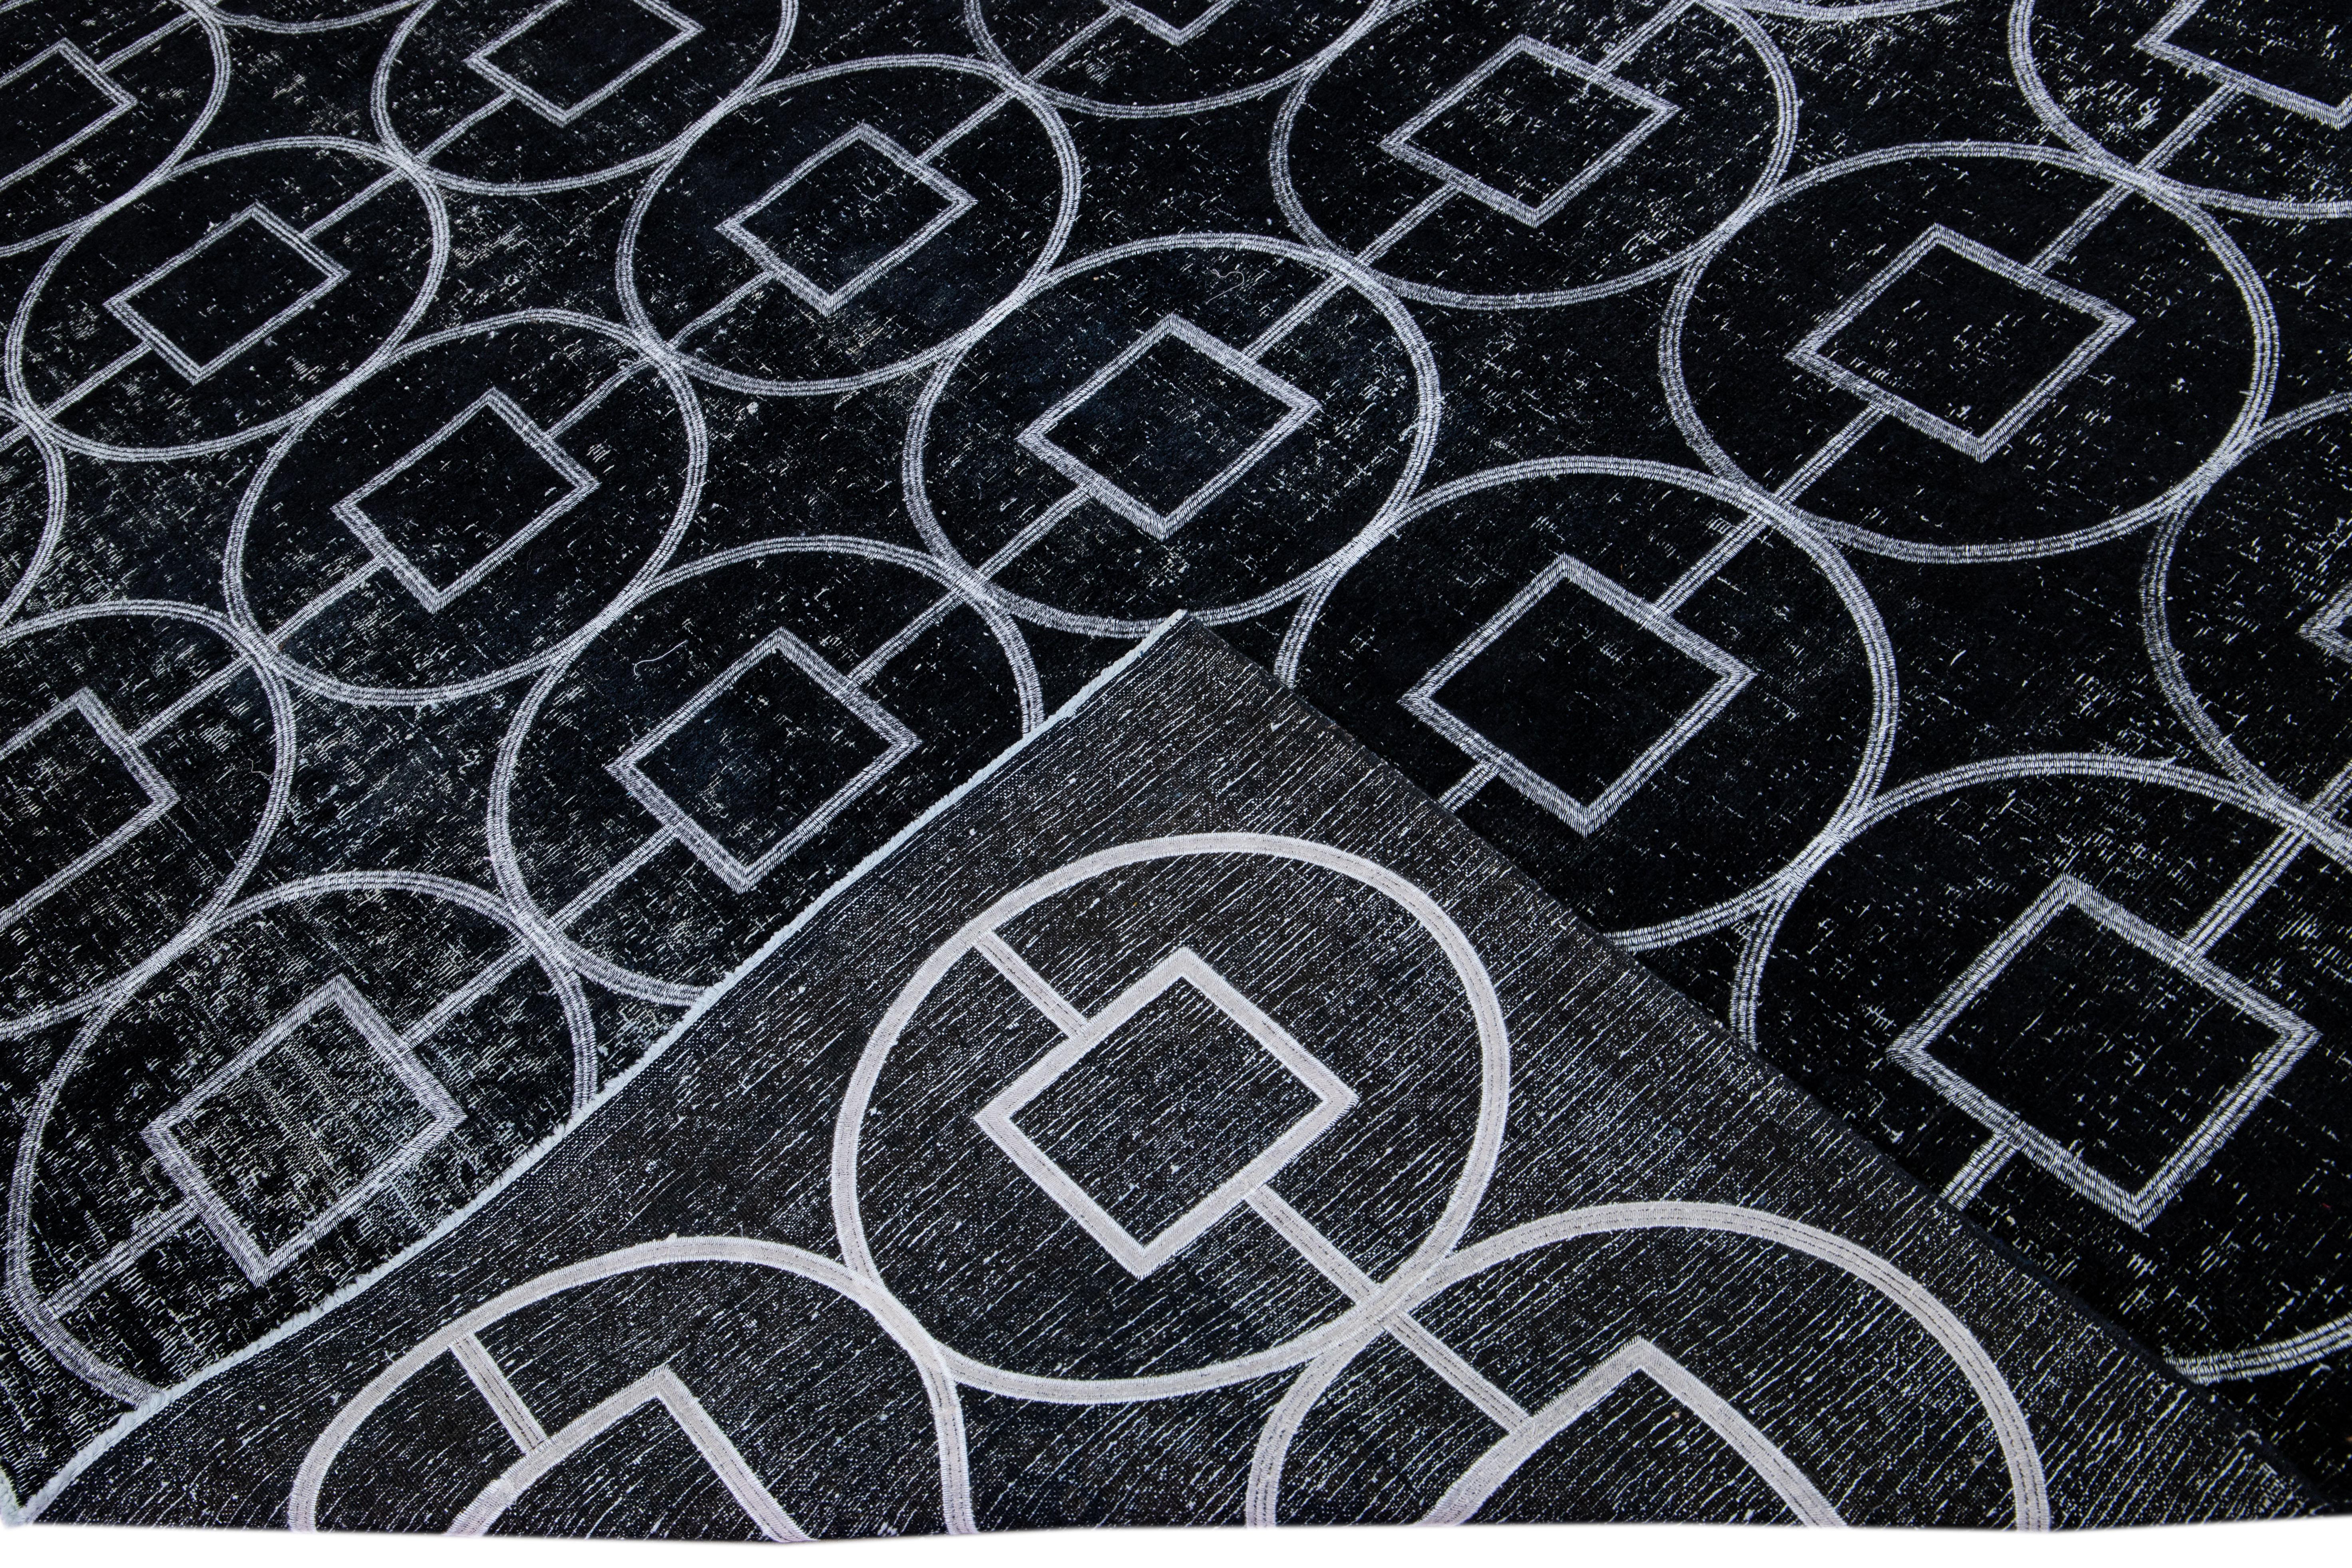 Beautiful Turkish handmade wool rug with a black distress look field. This Modern rug has white accents featuring a gorgeous all-over geometric pattern design.

This rug measures: 10' x 12'6.

Our rugs are professional cleaning before shipping.